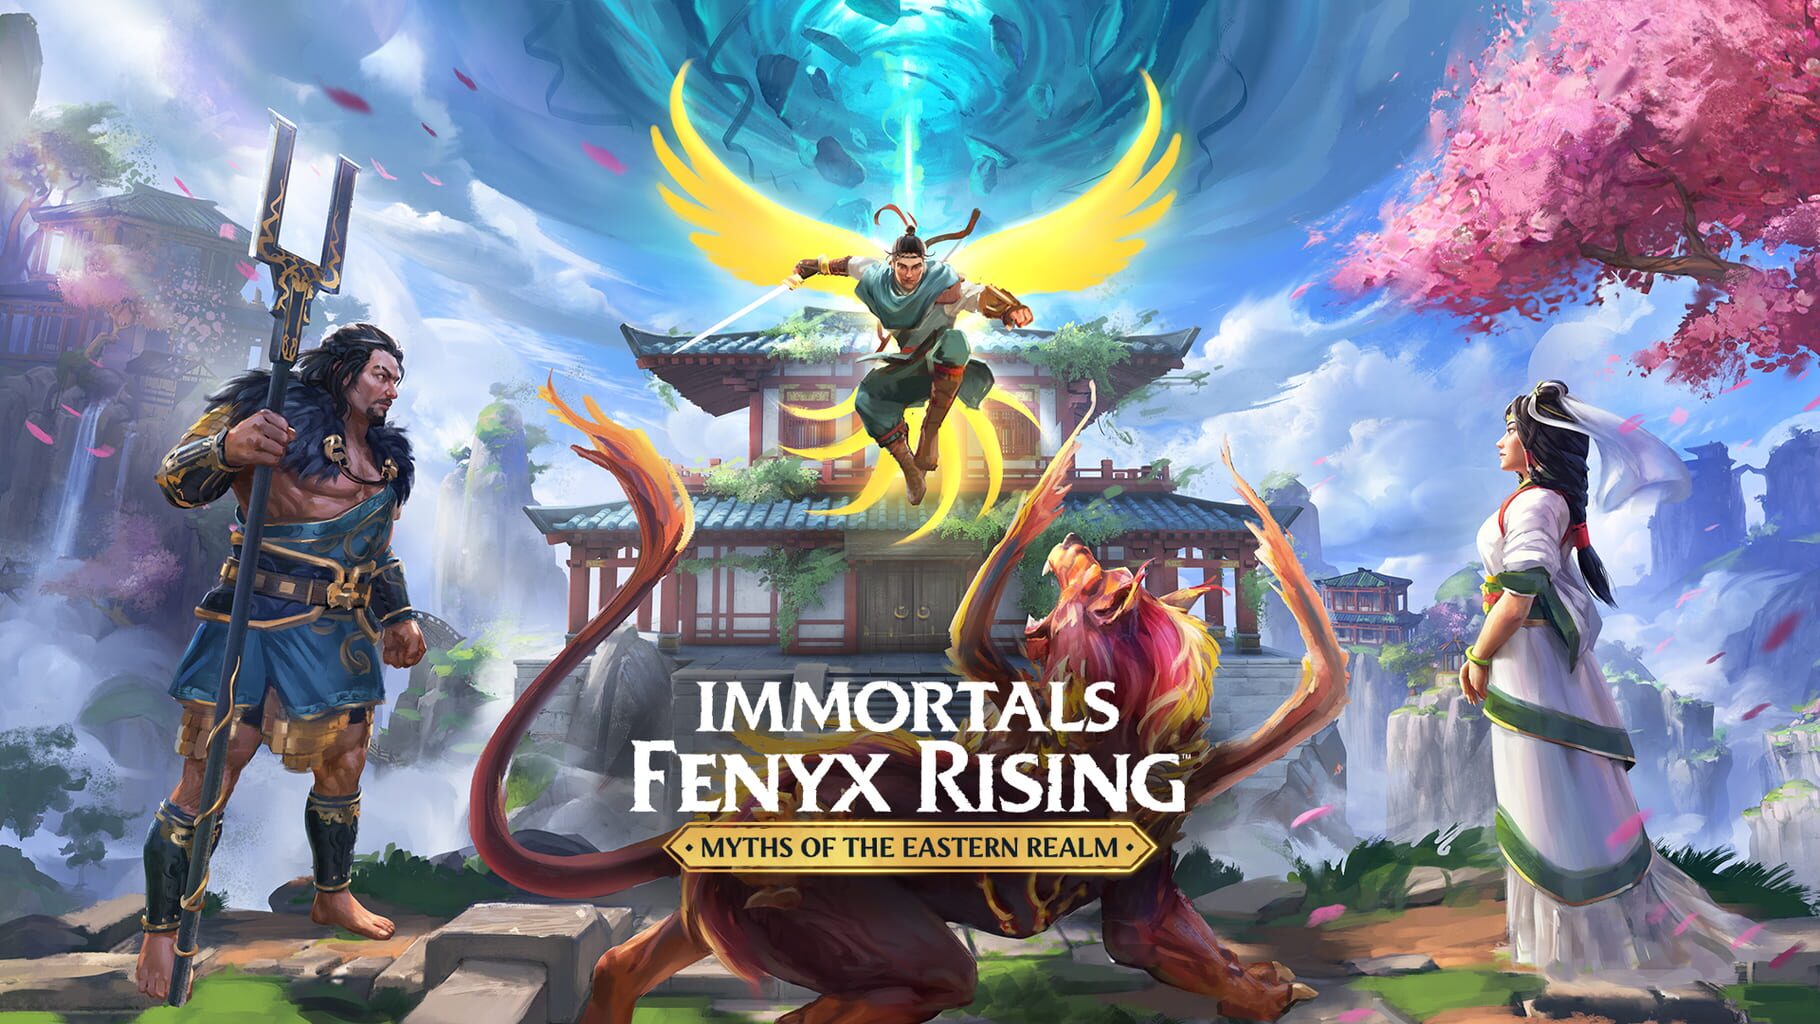 Immortals Fenyx Rising: Myths of the Eastern Realm artwork